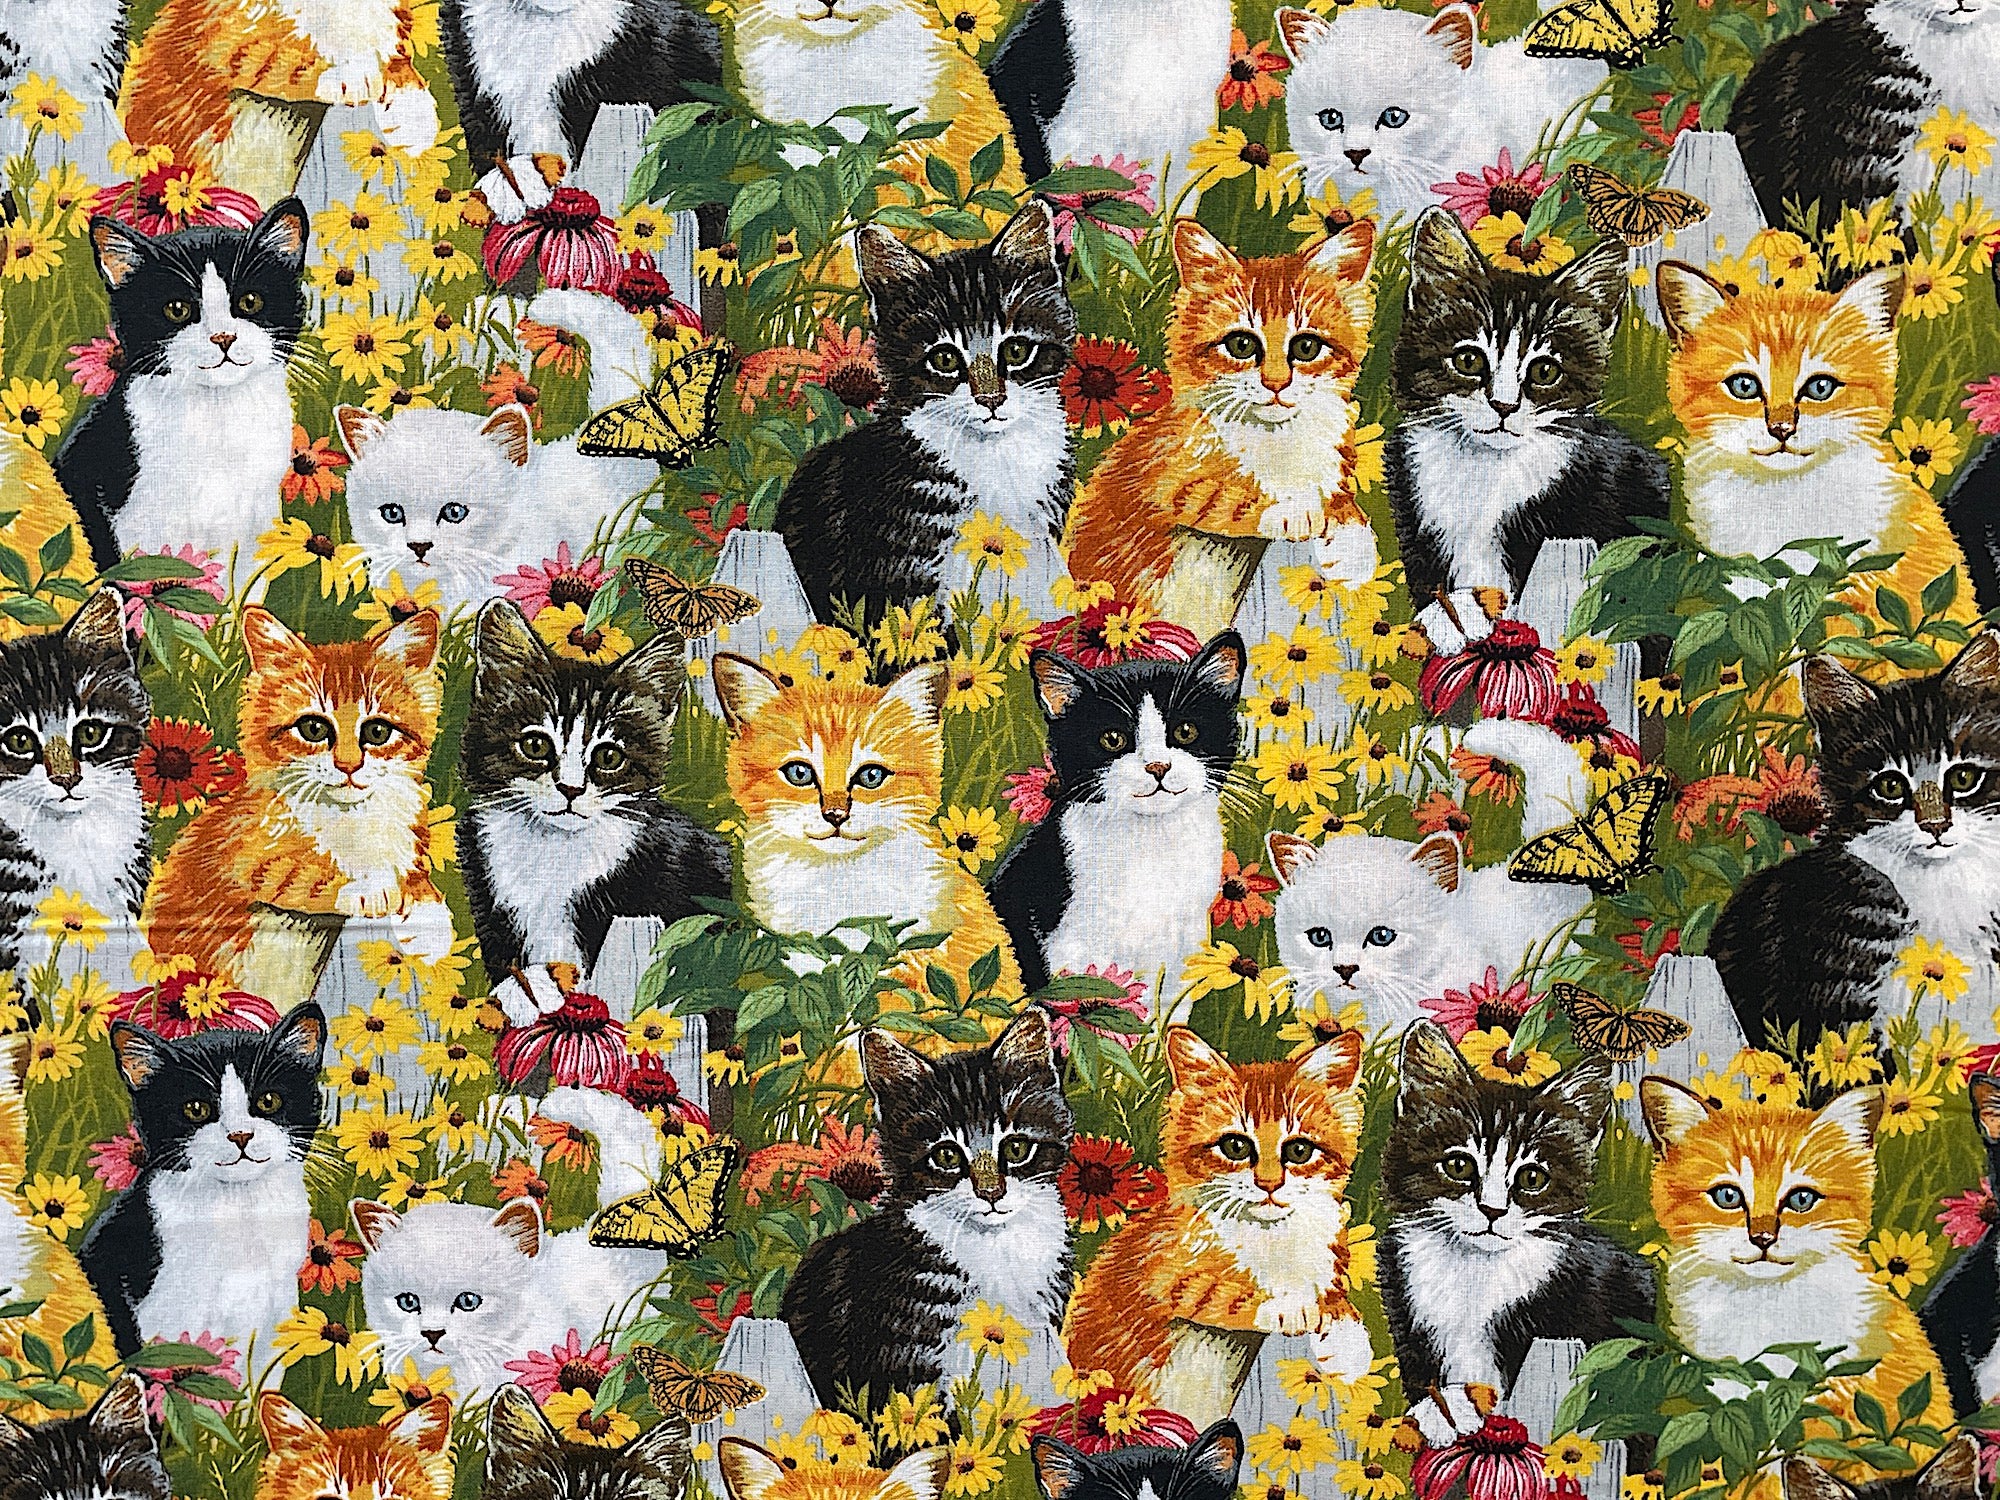 Cotton fabric covered with white, black and yellow cats.